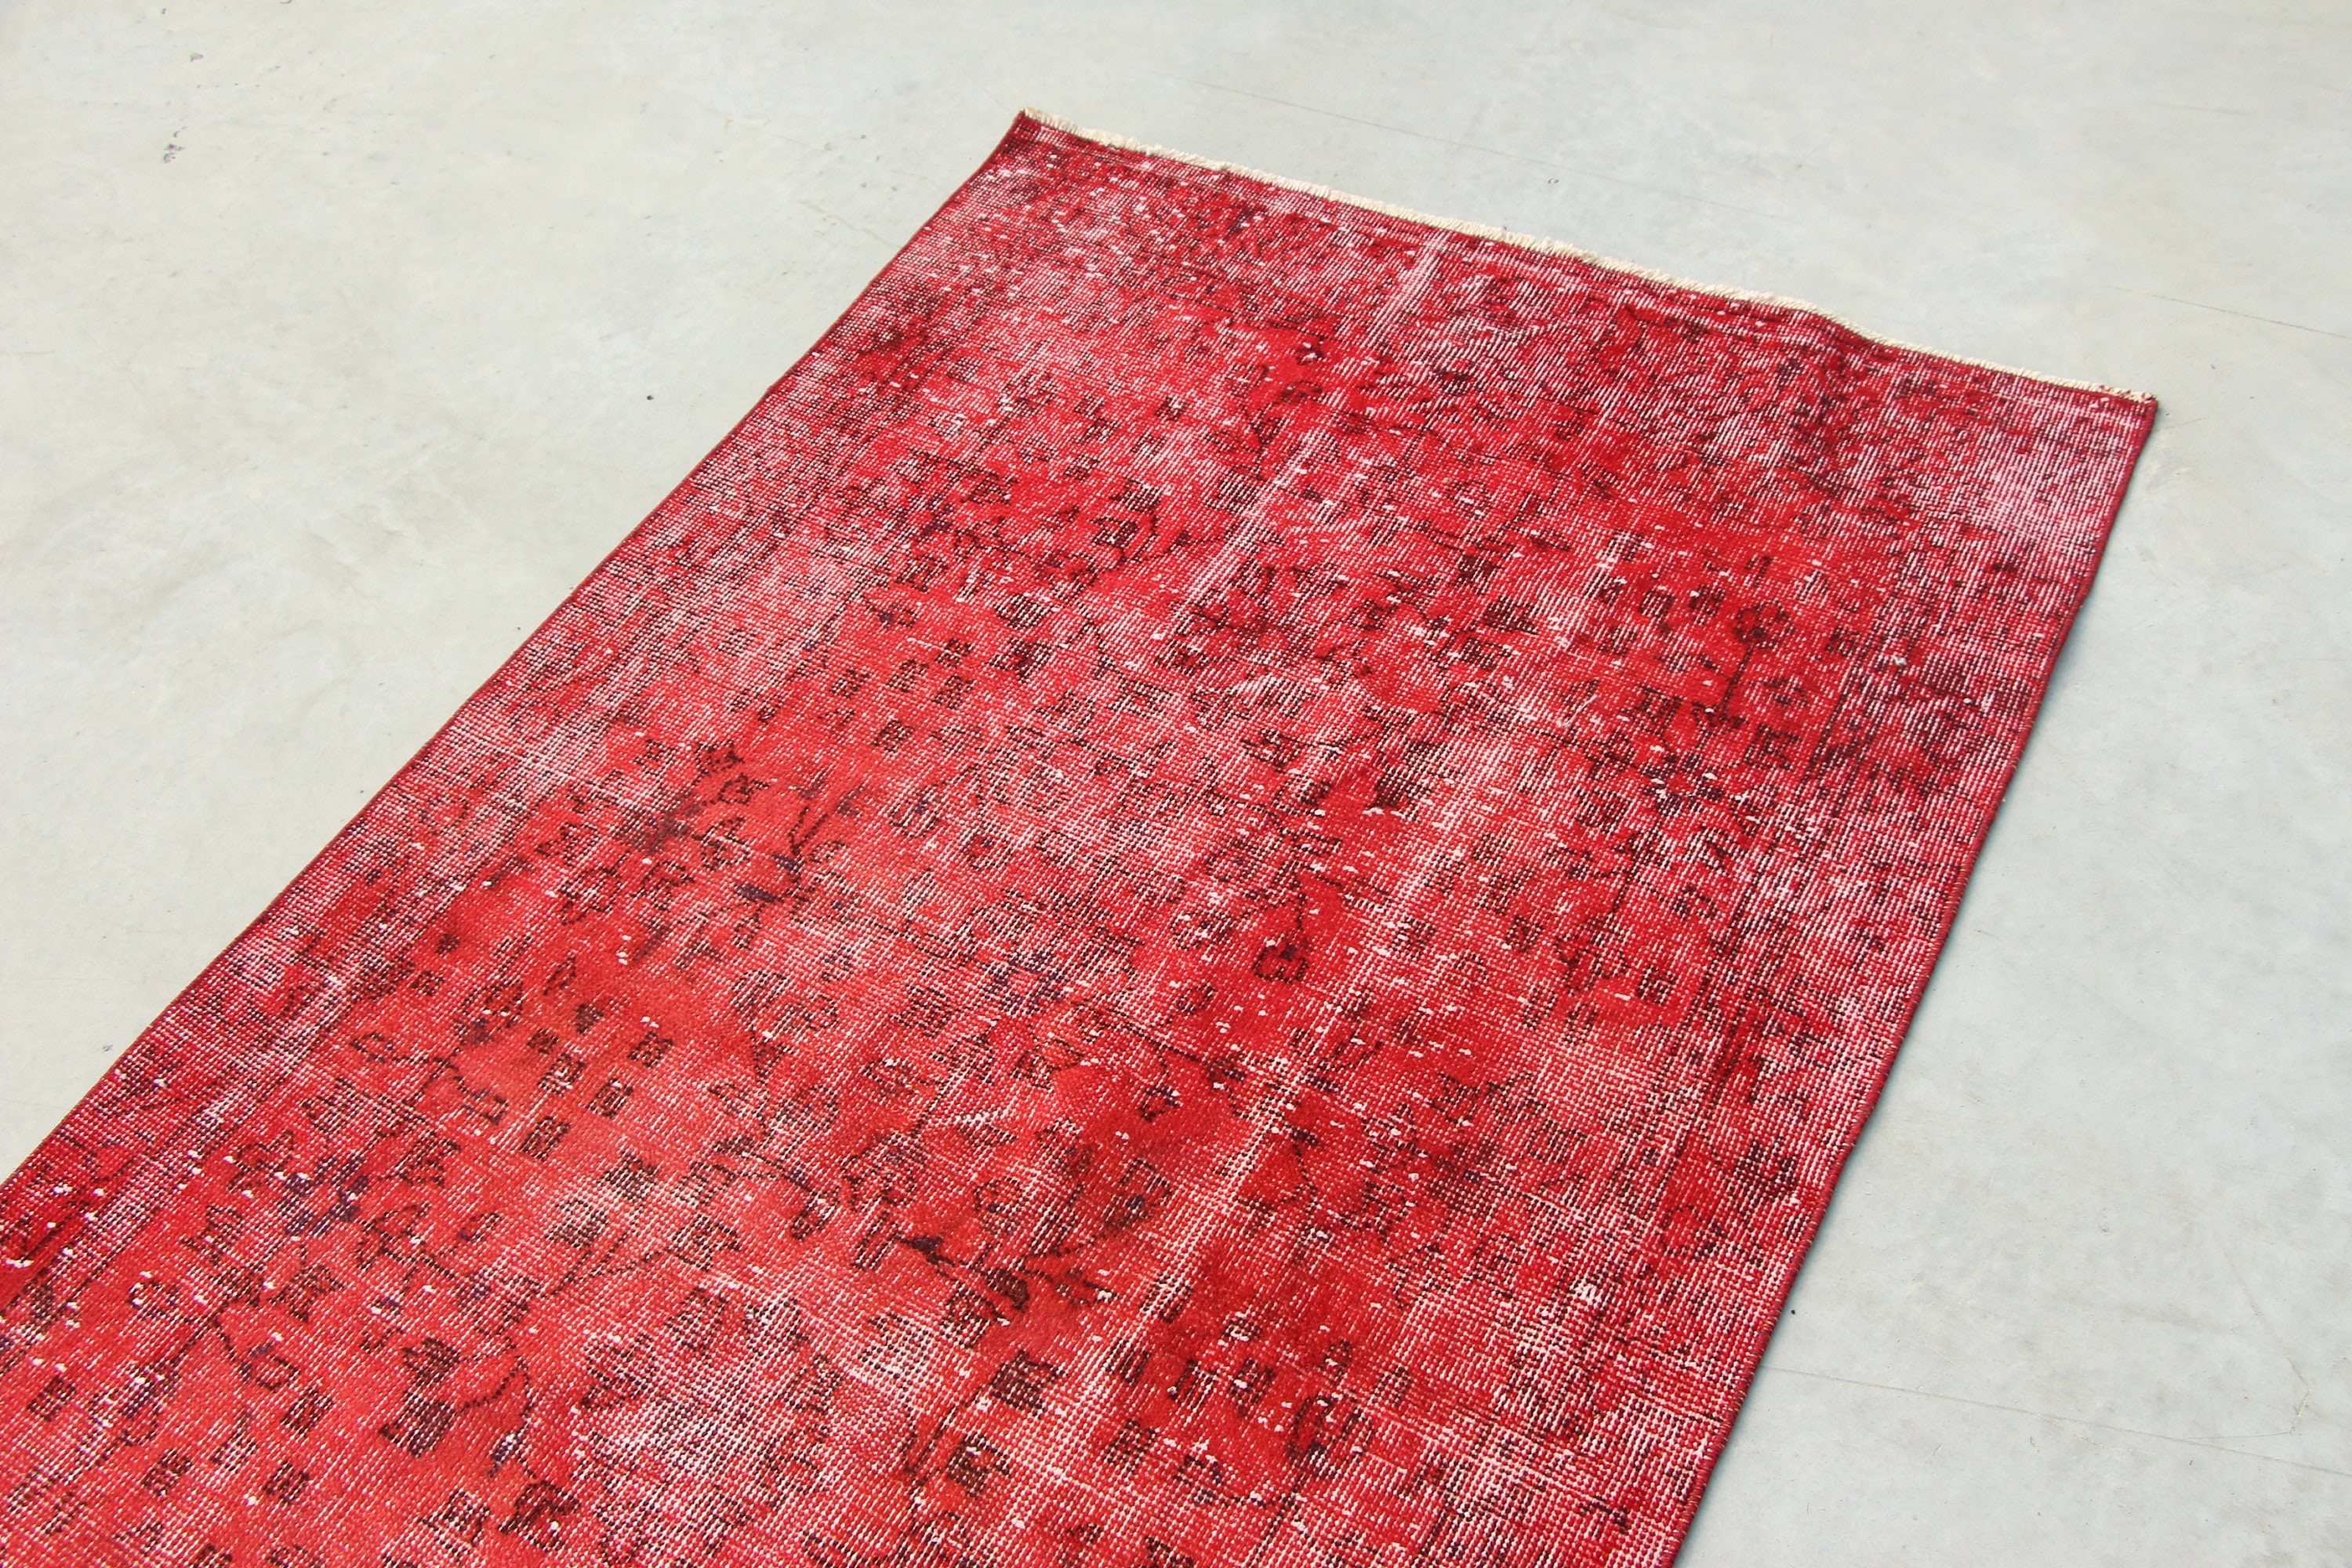 3.3x6.7 ft Accent Rug, Anatolian Rug, Red Moroccan Rug, Vintage Rug, Rugs for Entry, Moroccan Rugs, Turkish Rug, Kitchen Rugs, Entry Rug